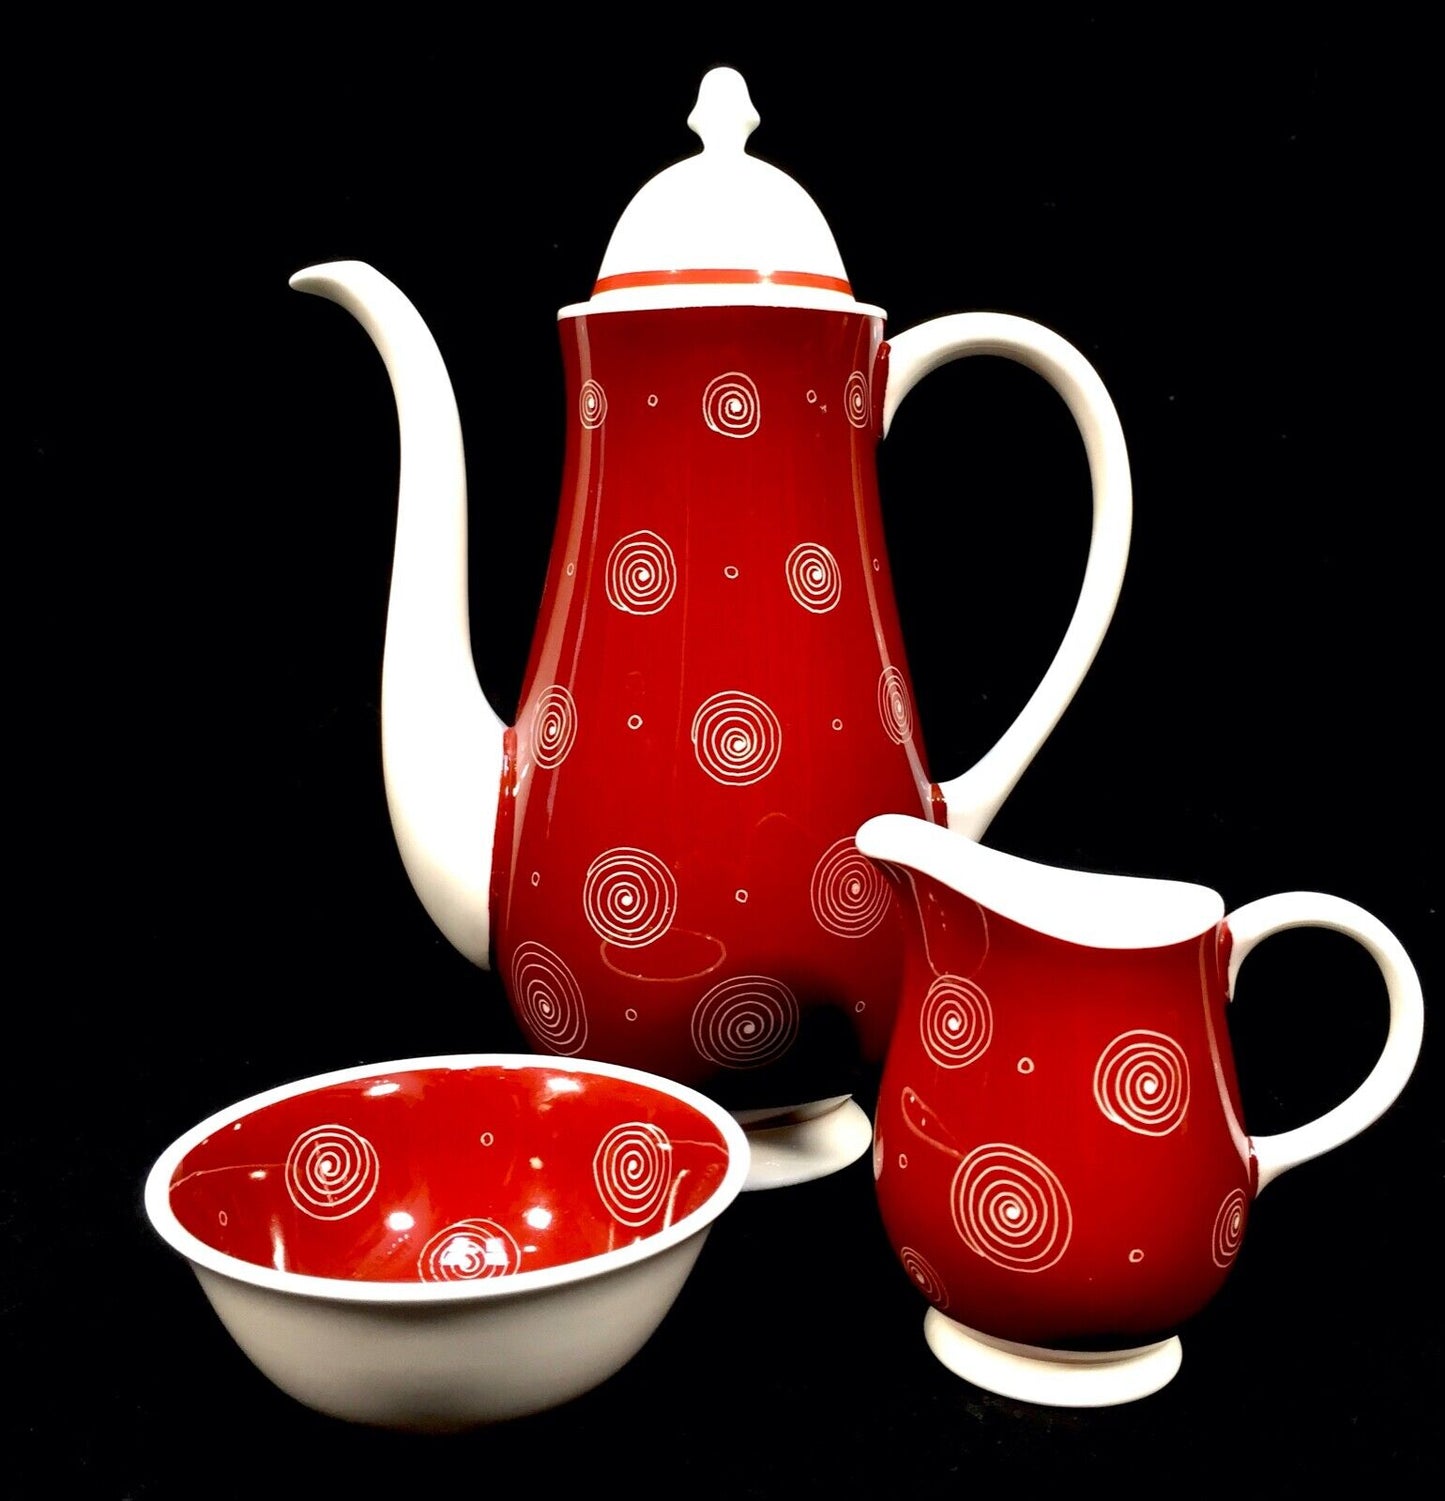 Vintage Susie Cooper Coffee Set for 6 people / Red & White Swirls / Antique